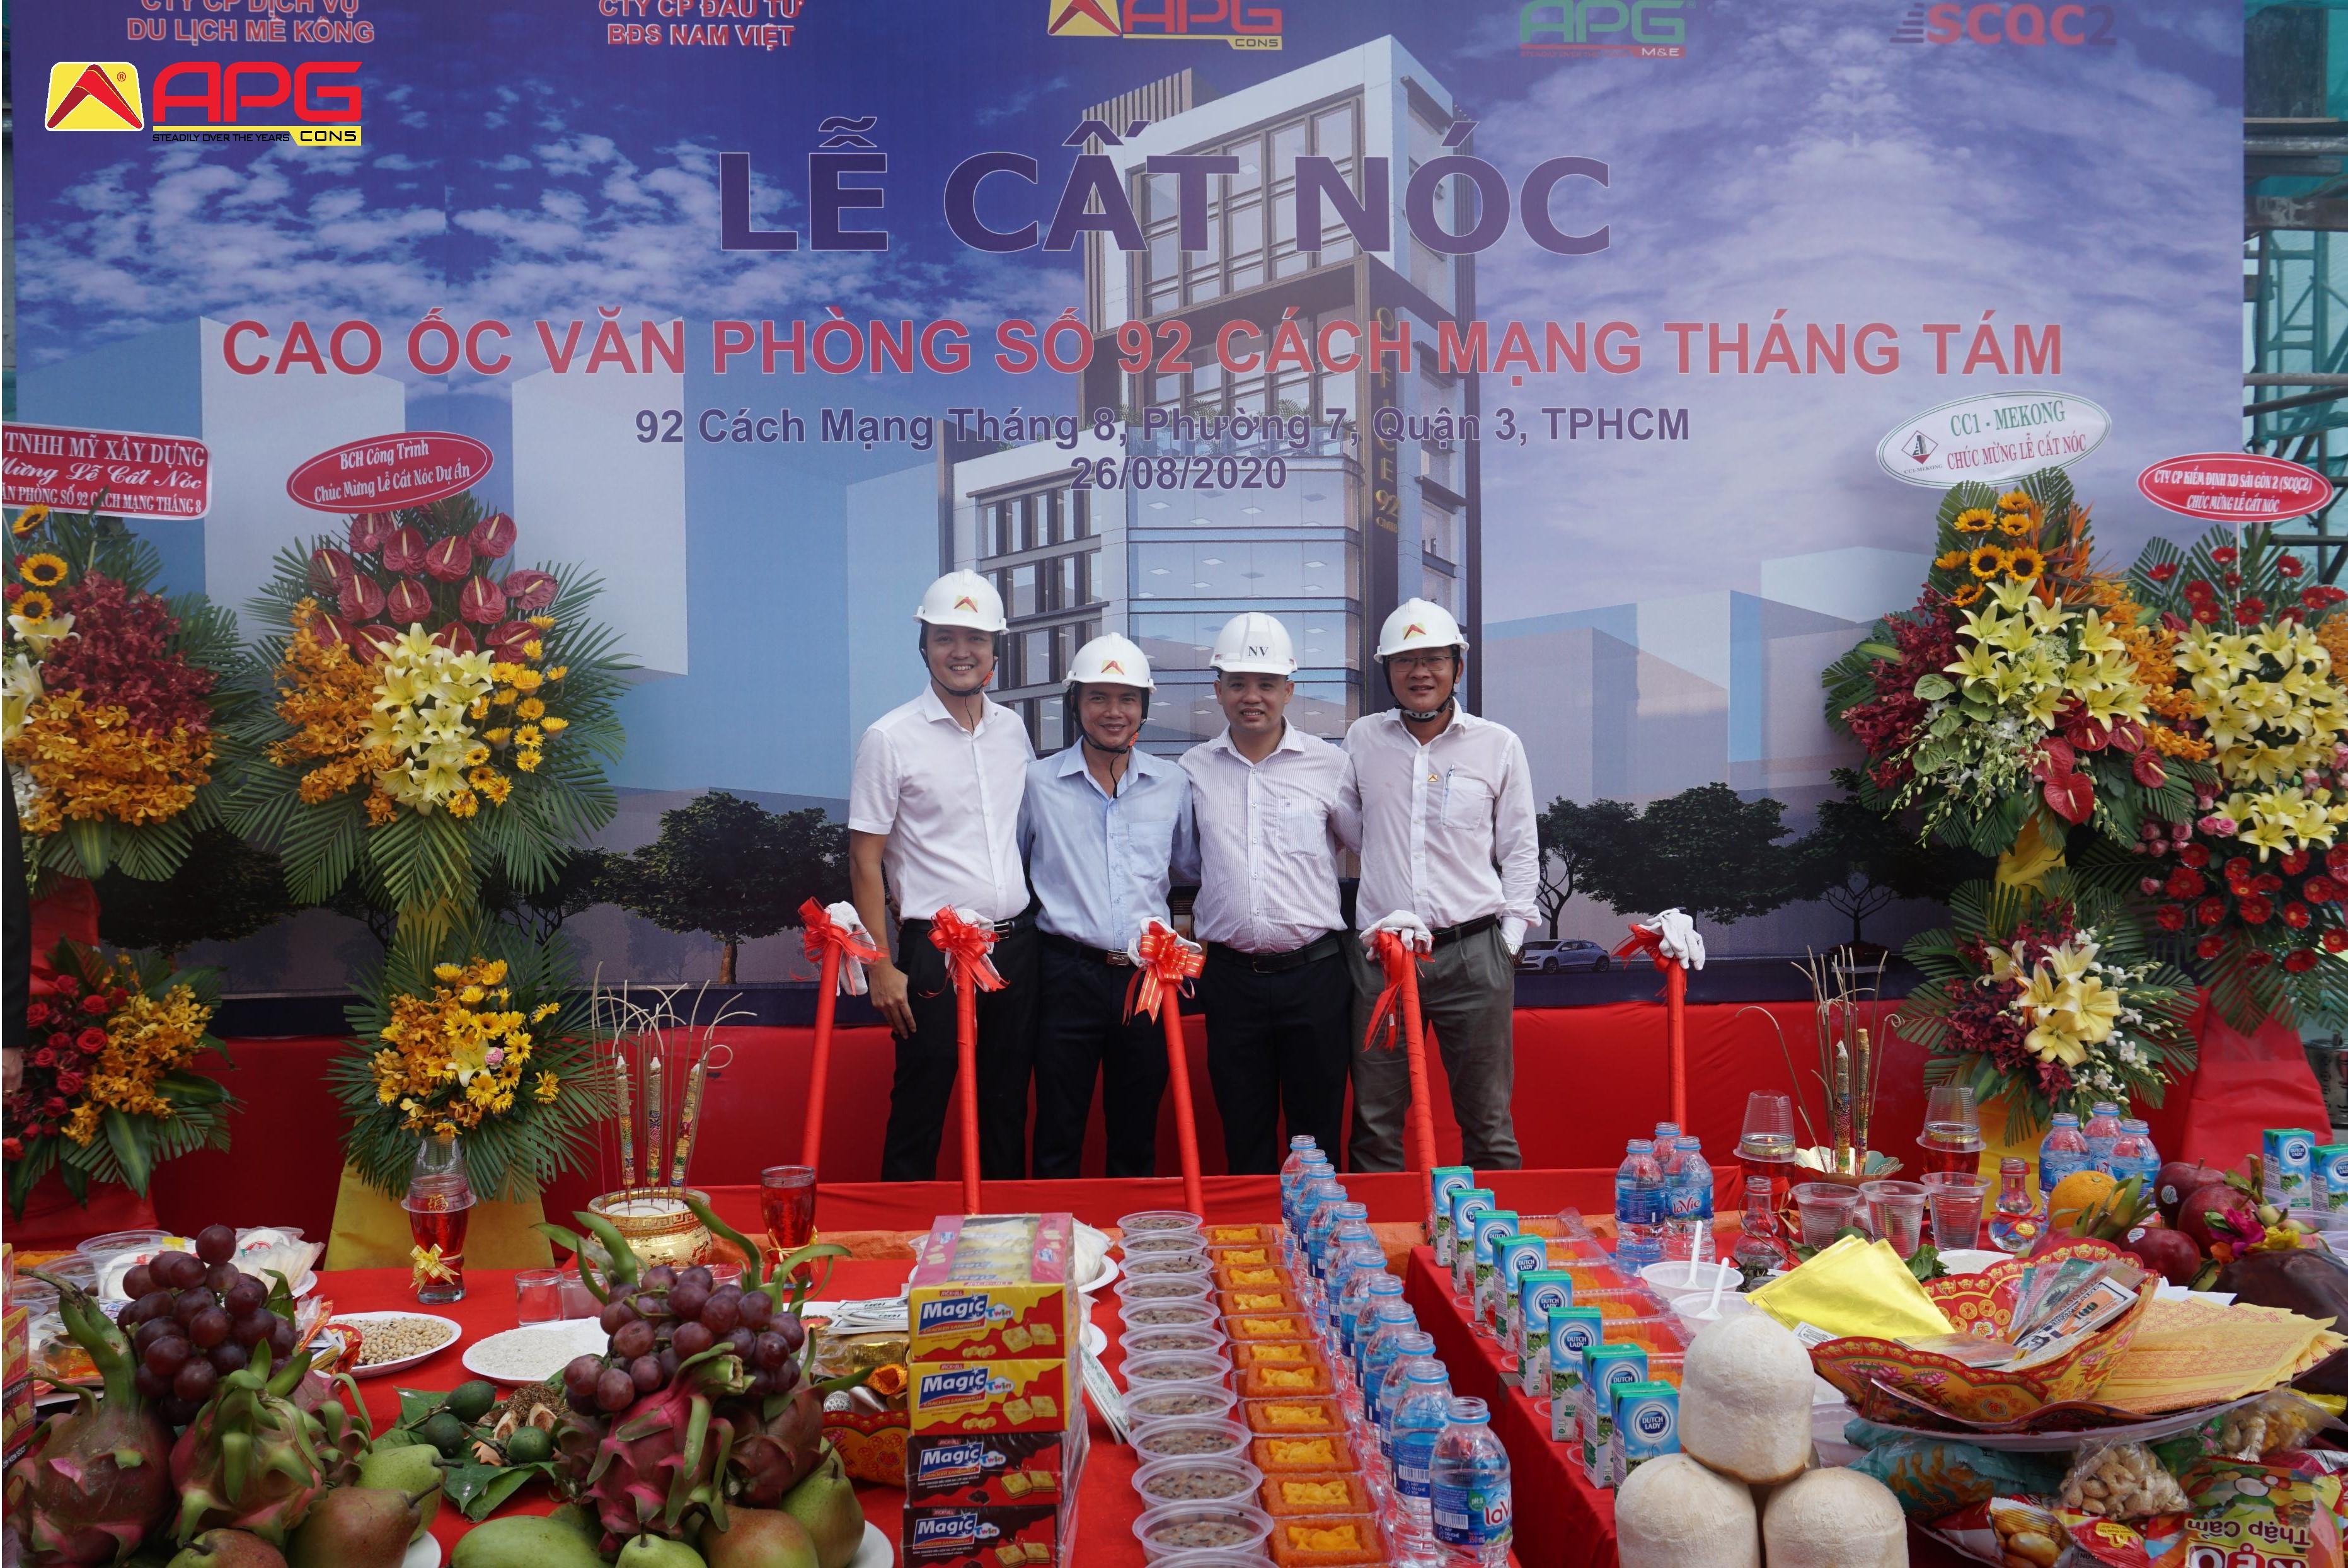 The topping out ceremony of No. 92 Cach Mang Thang 8 office building Project